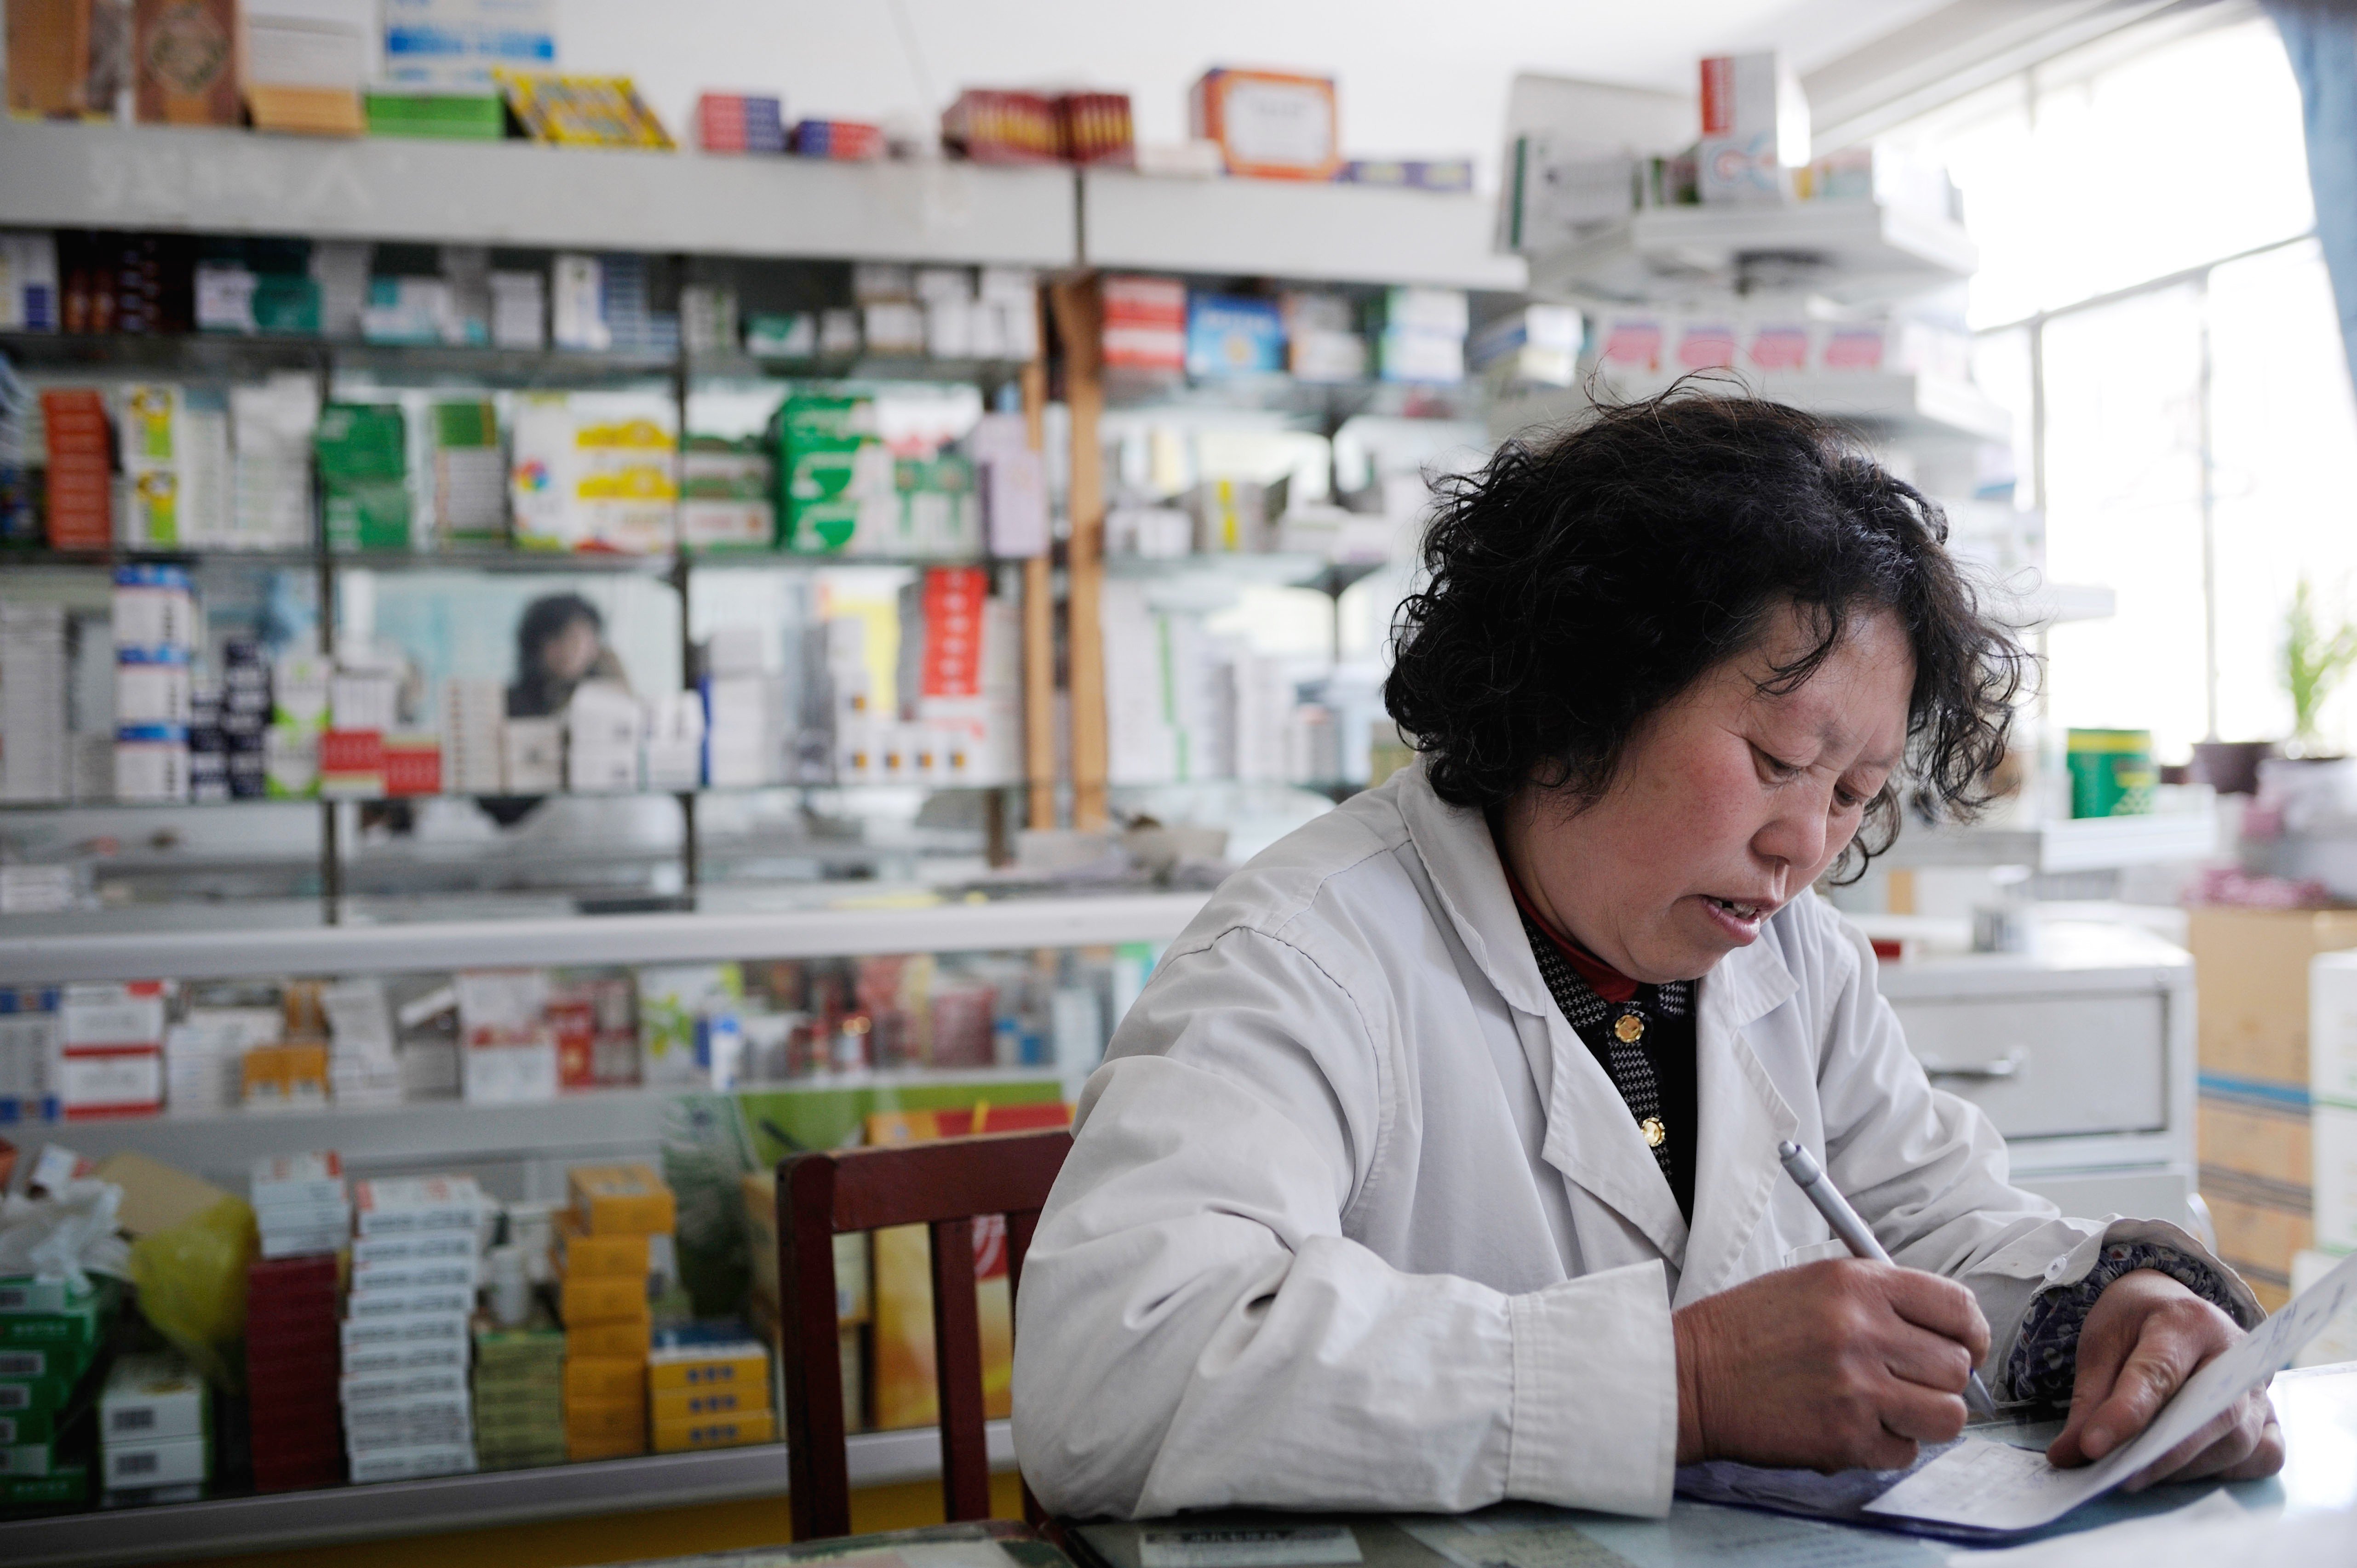 Beijing has moved to cut prices of drugs and improve their efficacy and safety. Here a woman works at the pharmacy of a state-owned hospital in a town in Hebei province, China, in this photo taken in 2008.